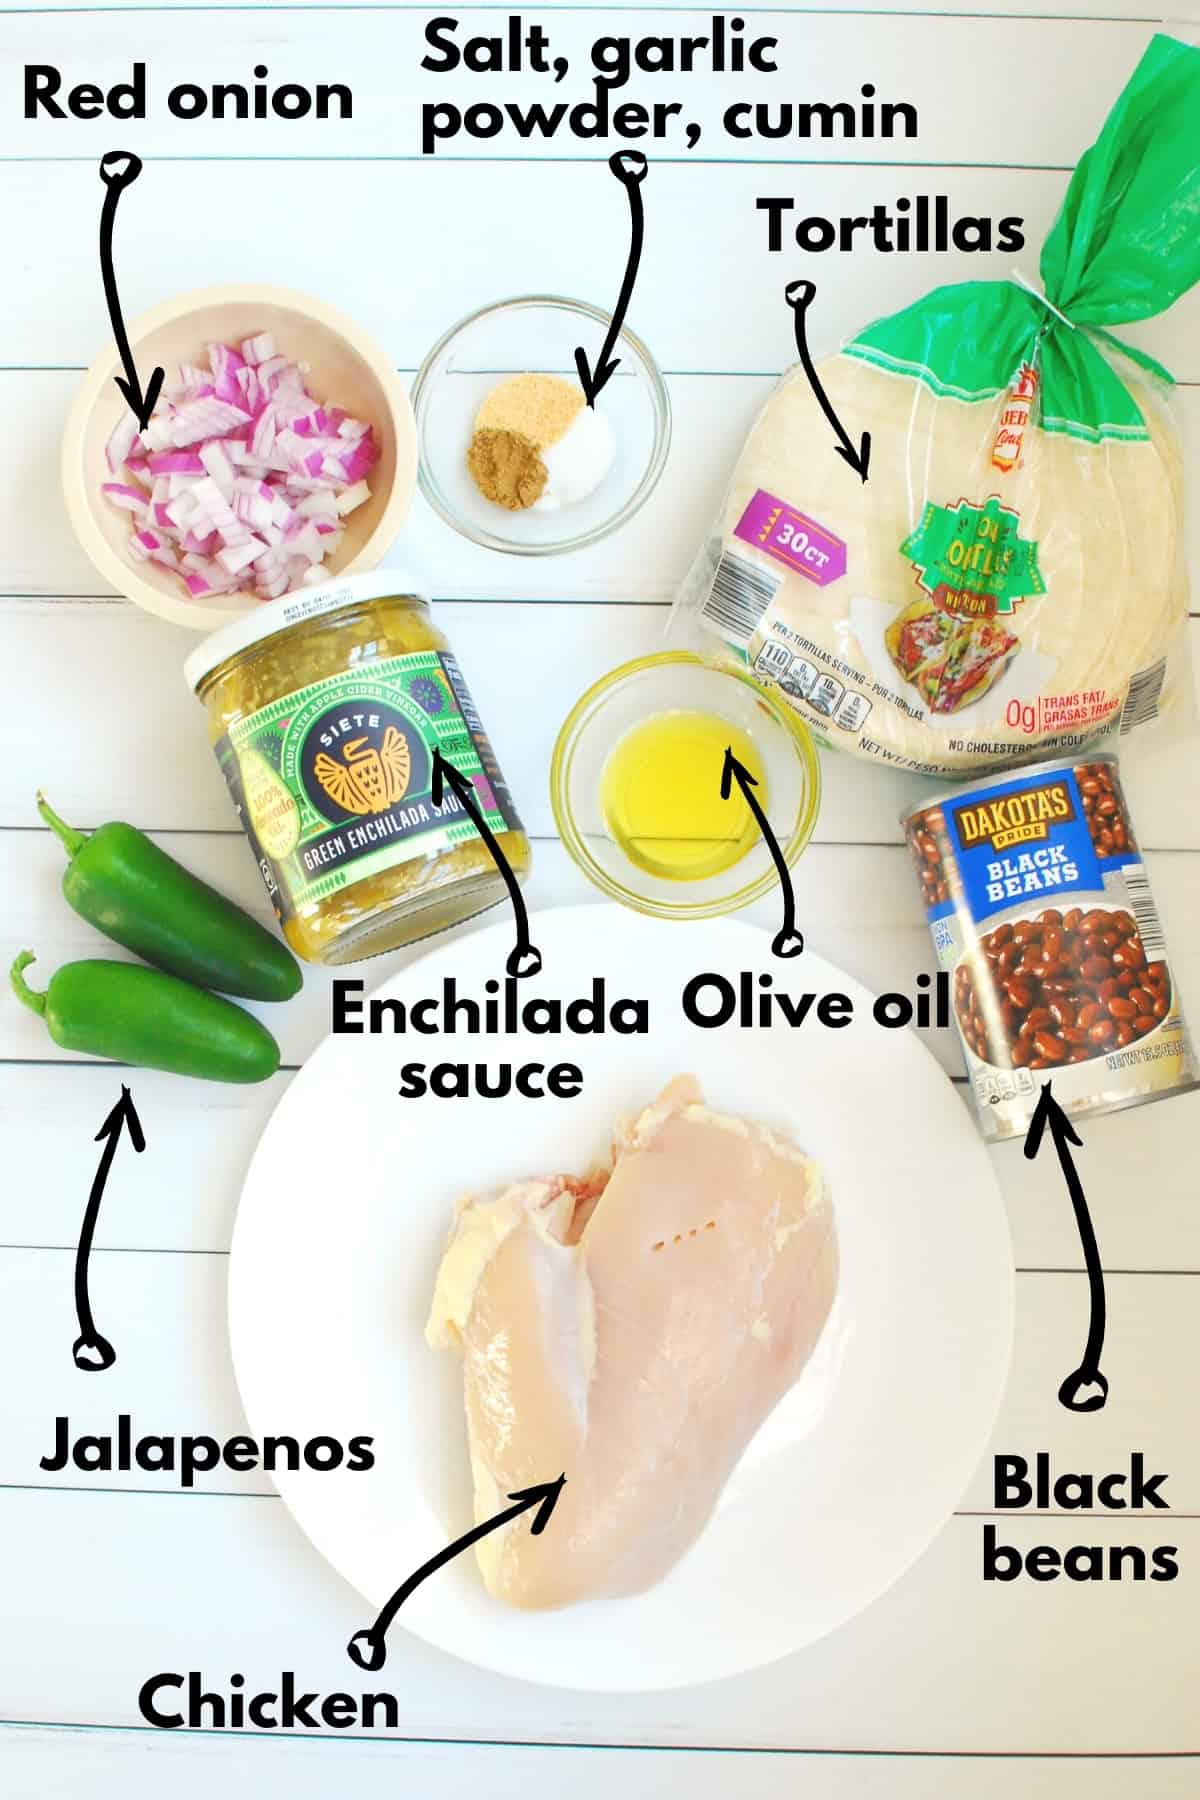 All the ingredients for the dish, including chicken, jalapenos, red onion, enchilada sauce, olive oil, beans, spices, and tortillas.